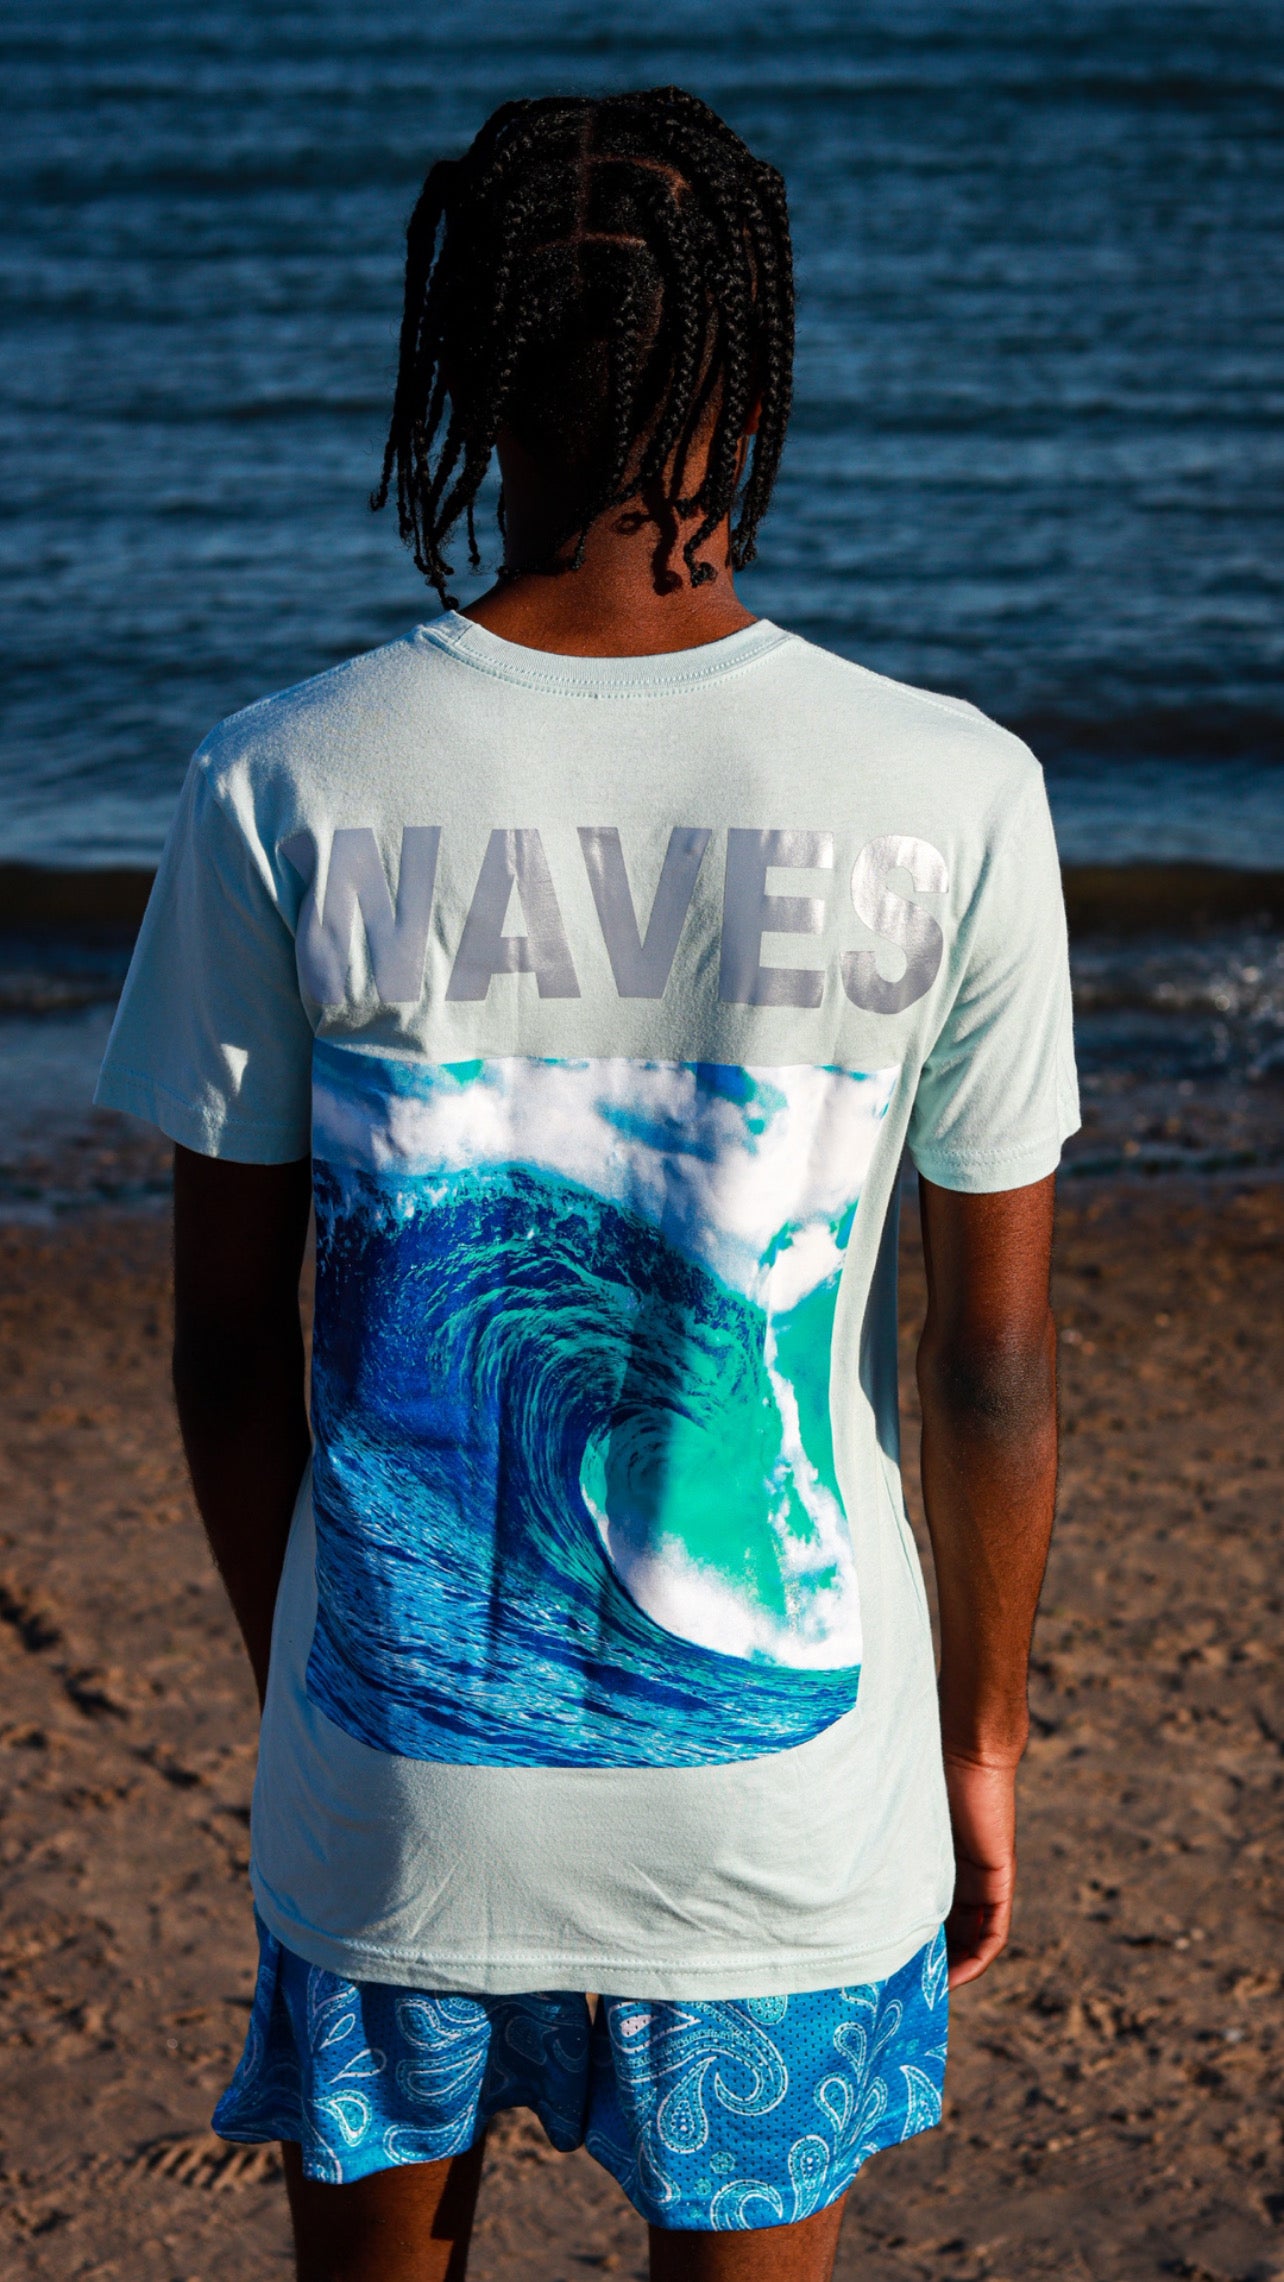 RIDE THE WAVE T-SHIRT 3M - BABY BLUE